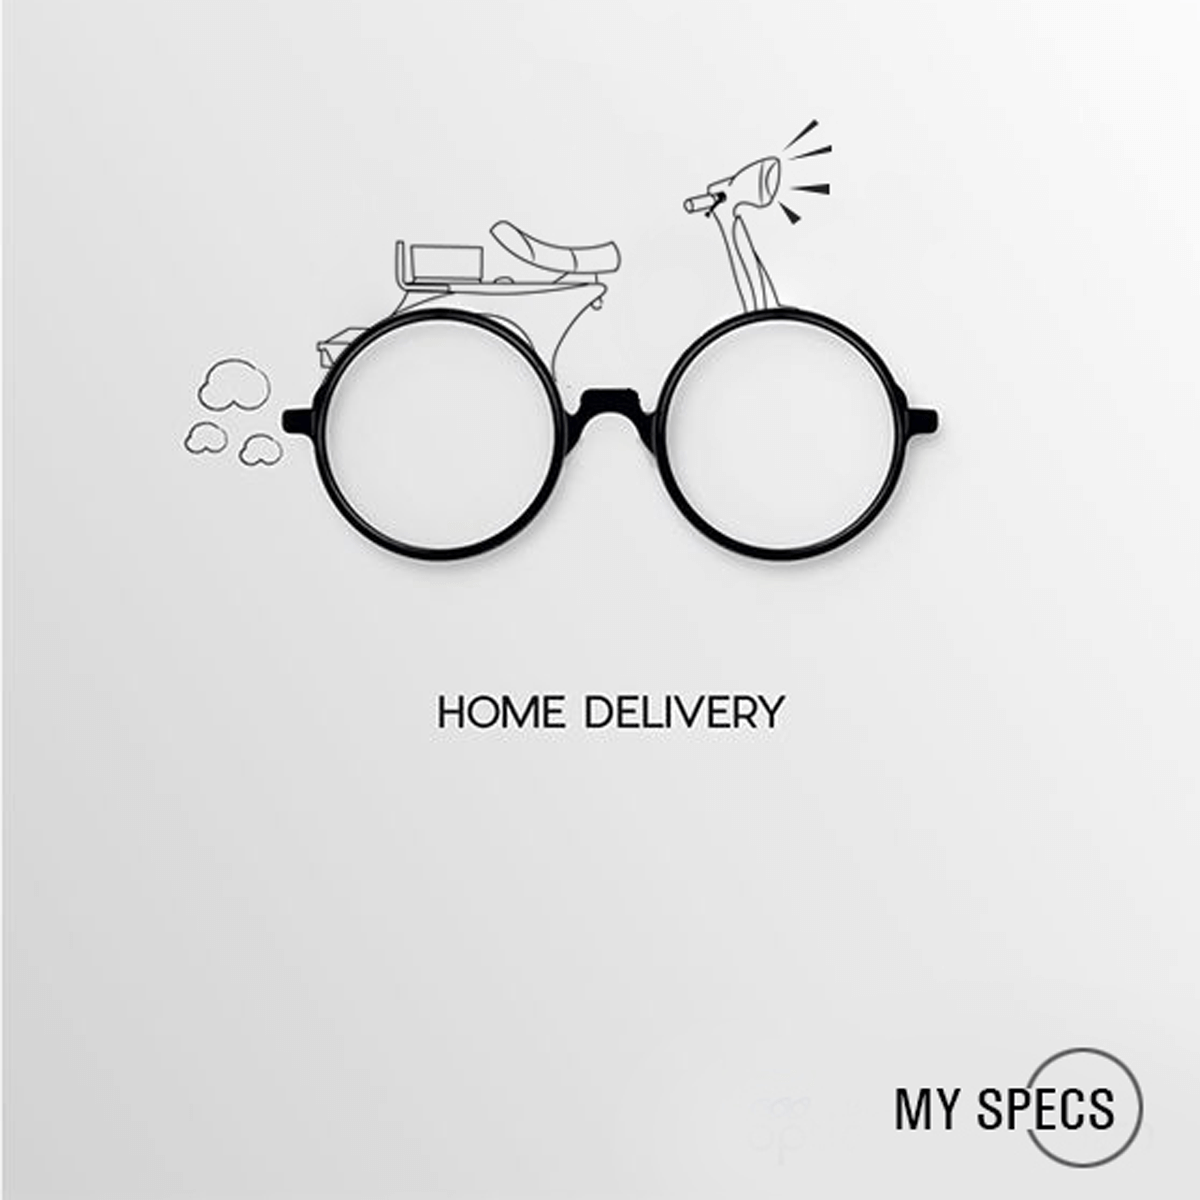 creative spects home delivery logo design